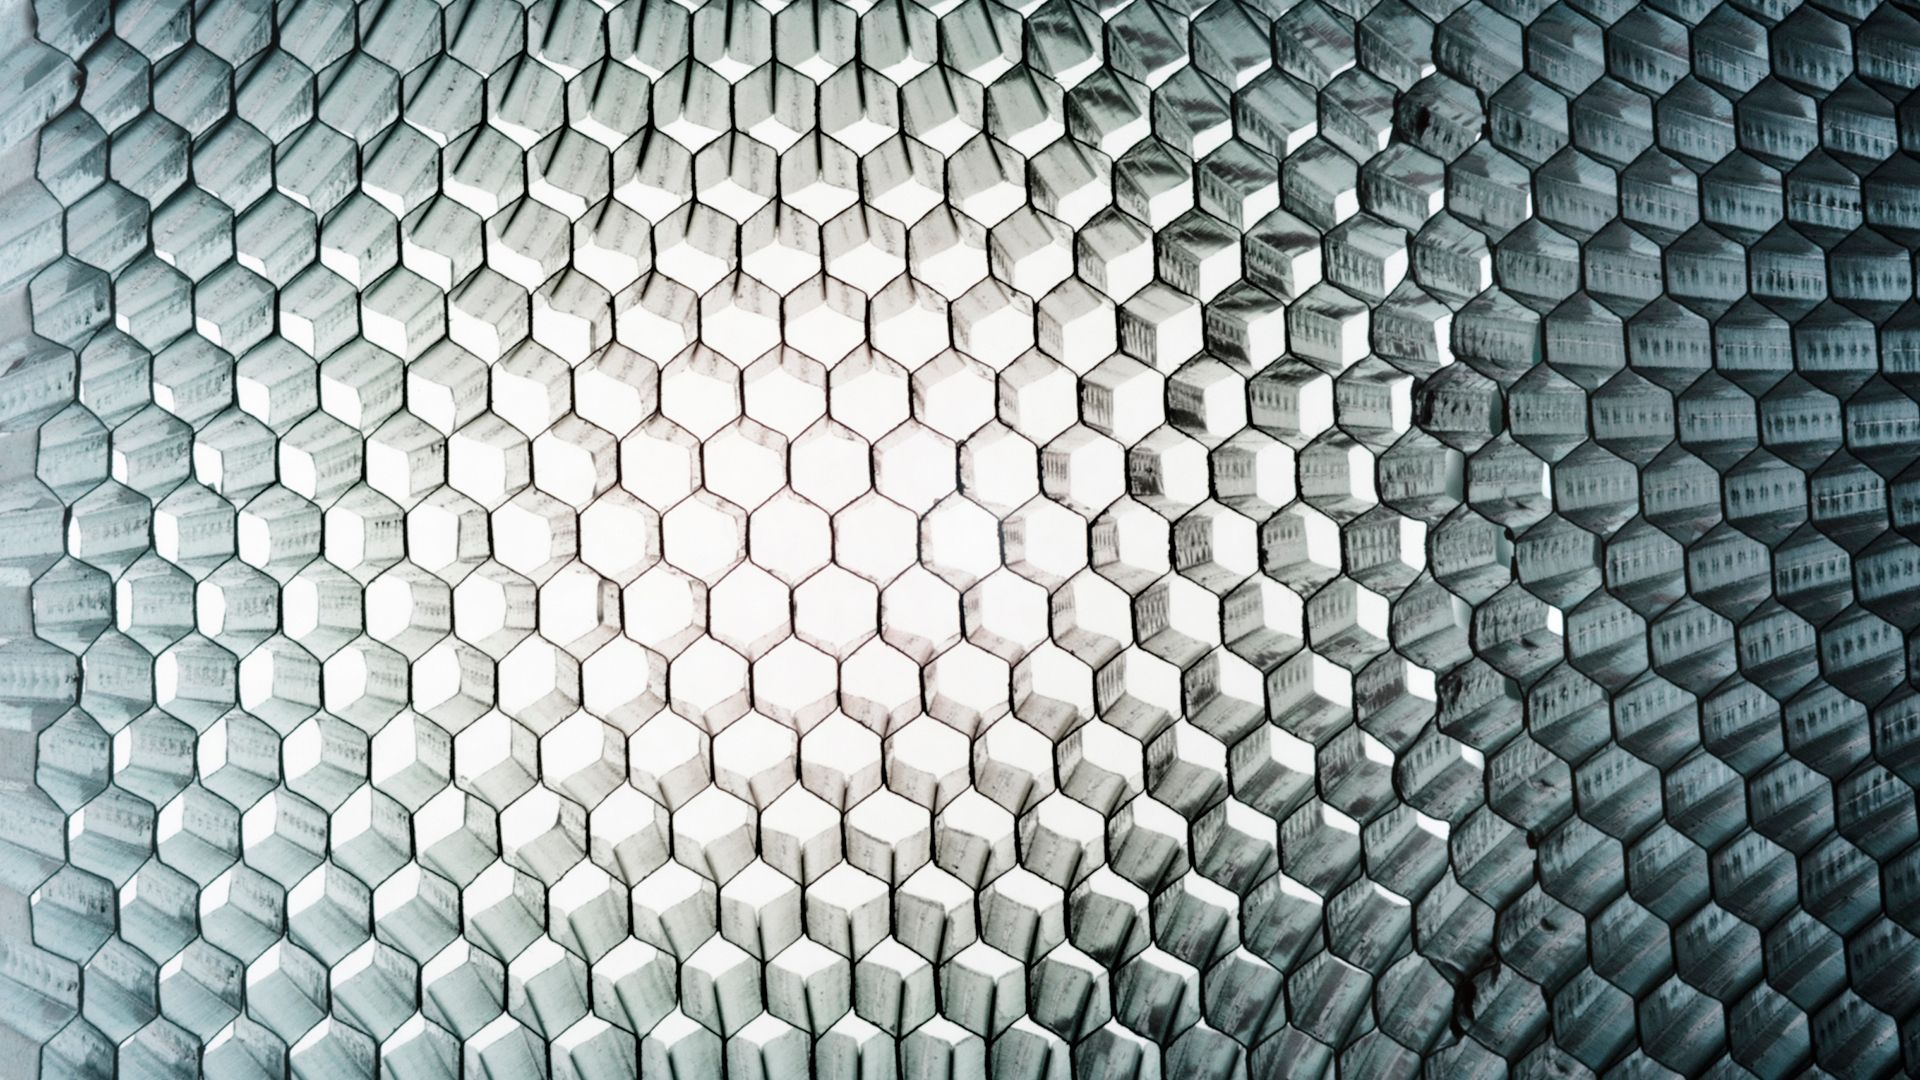 Studio close-up of a honey-comb metal panel, light-weight, sturdy and flexible. Colour-Toned. AdobeRGB